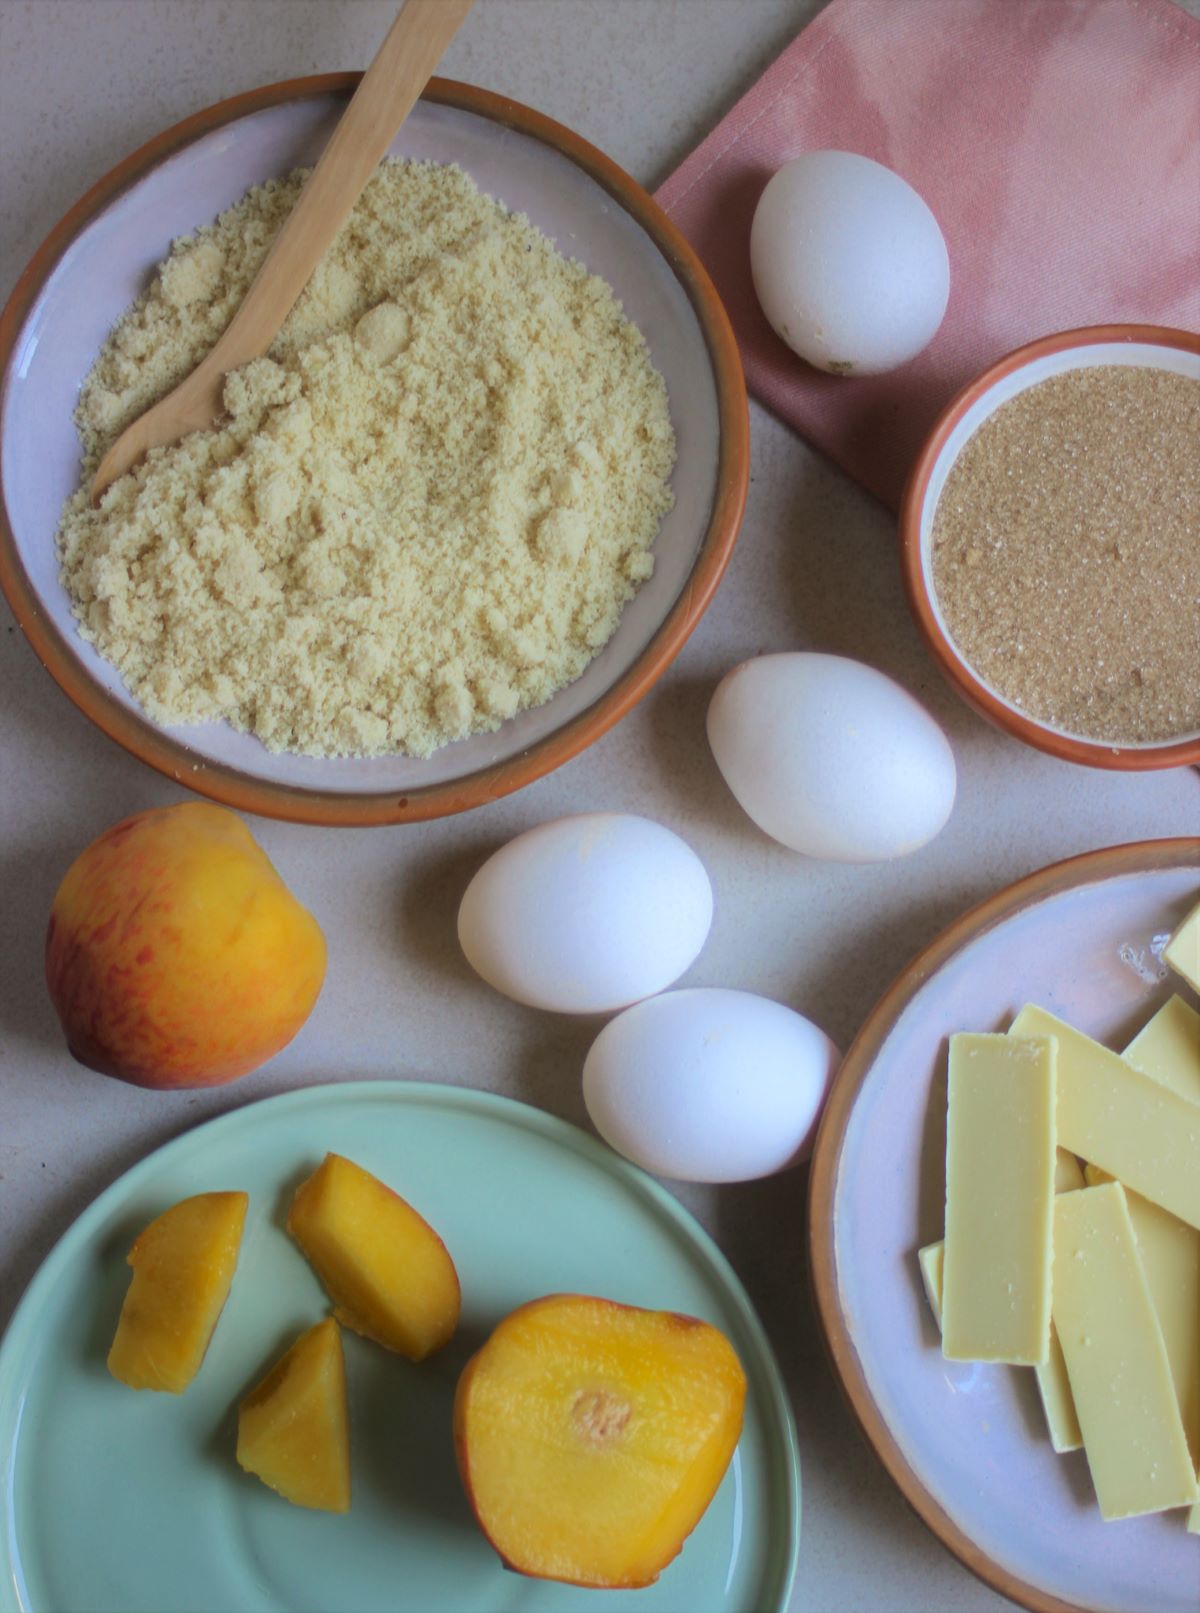 Almond and peach bar ingredients seen from above.